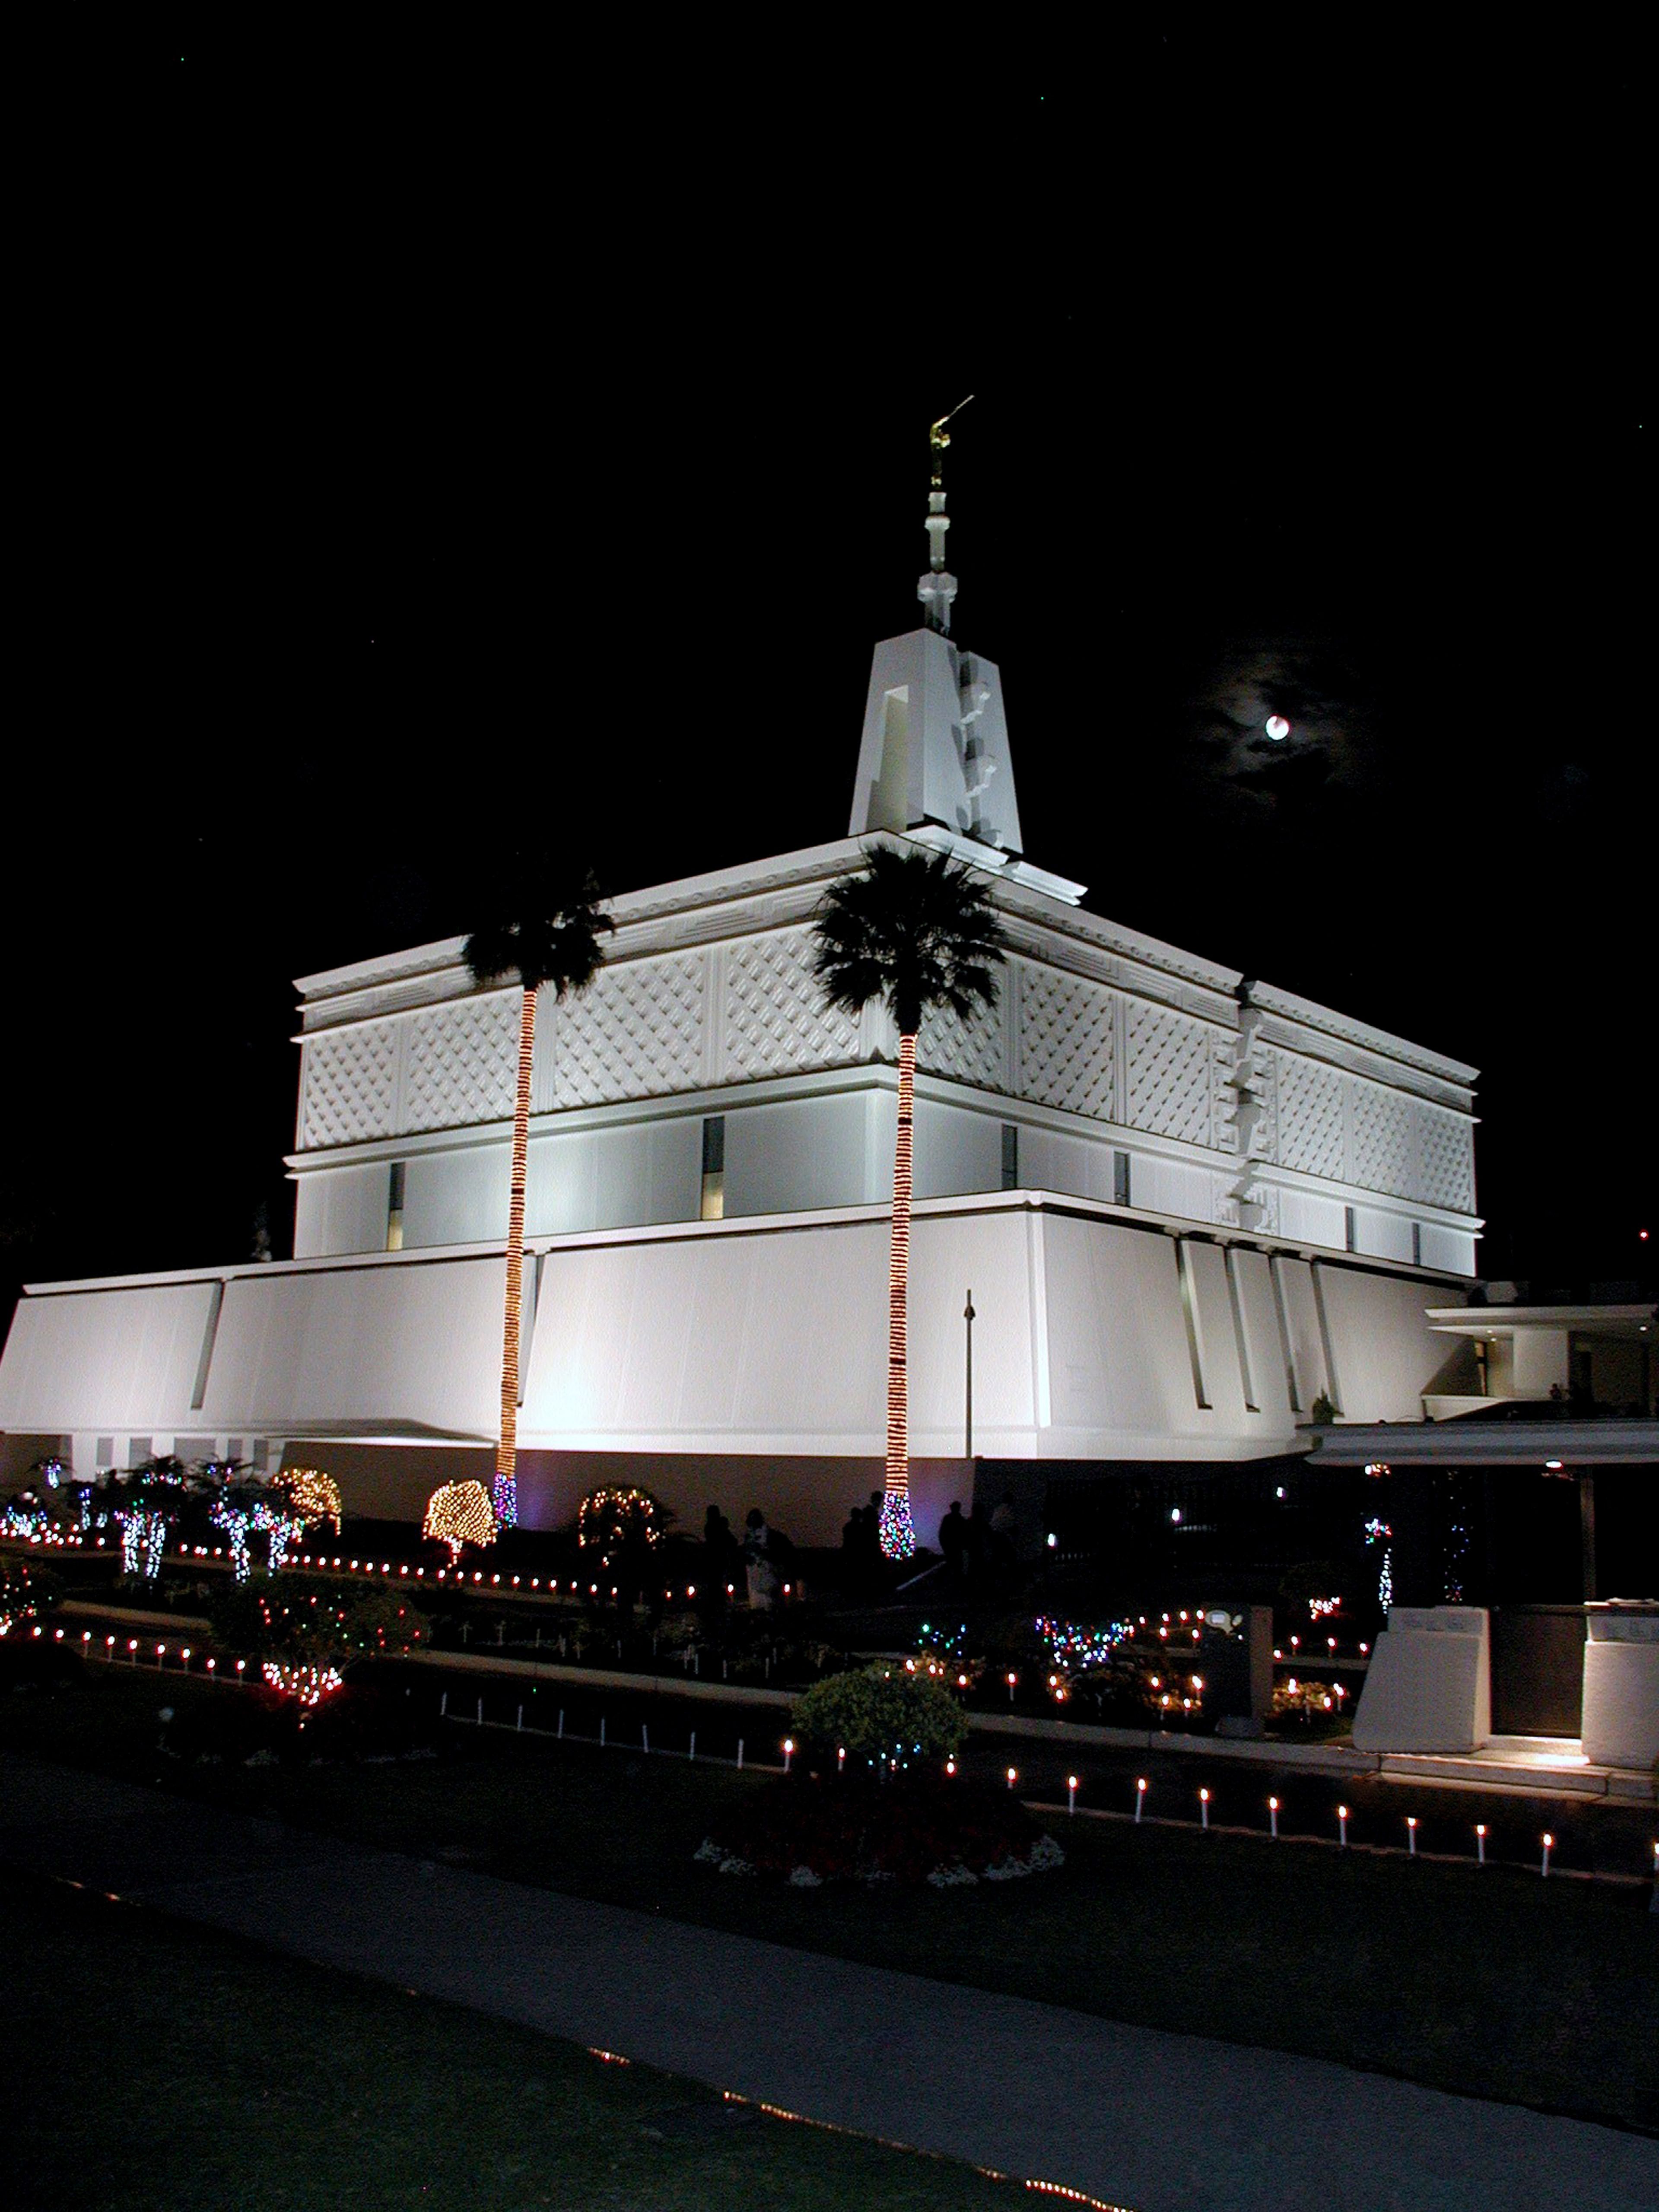 The Mexico City Mexico Temple at Christmas, including scenery.